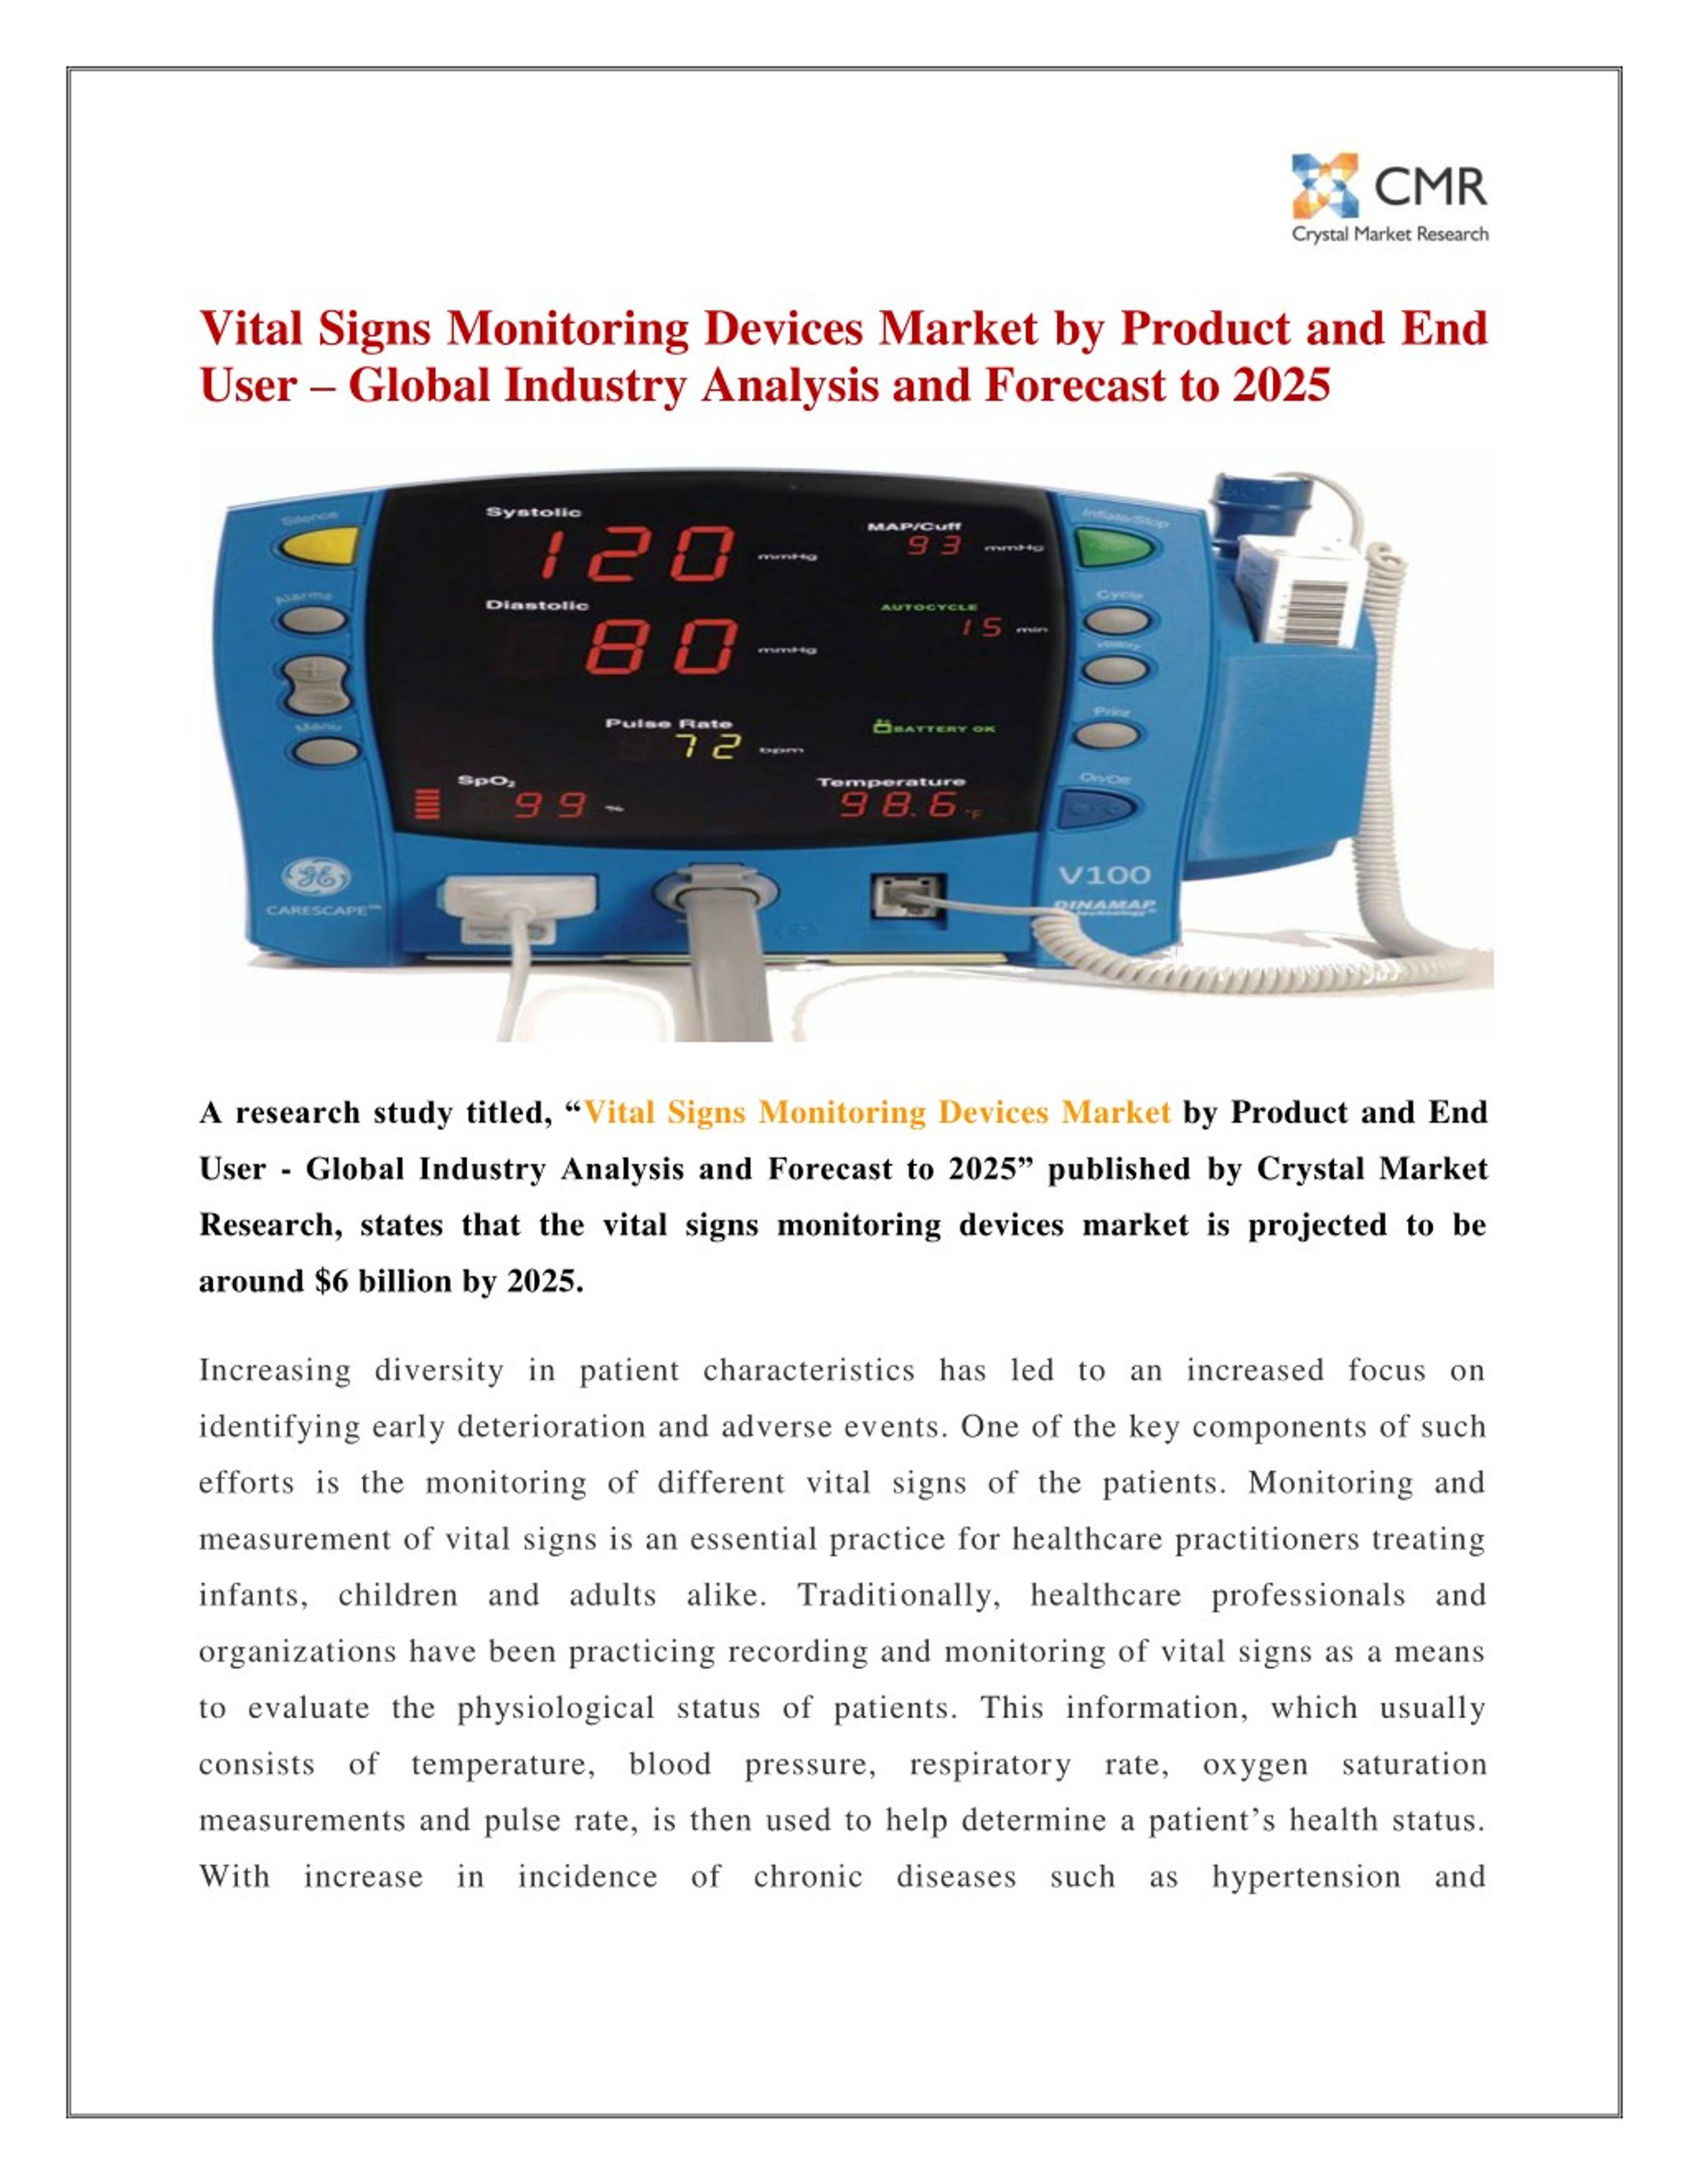 Download nonin medical port devices driver device